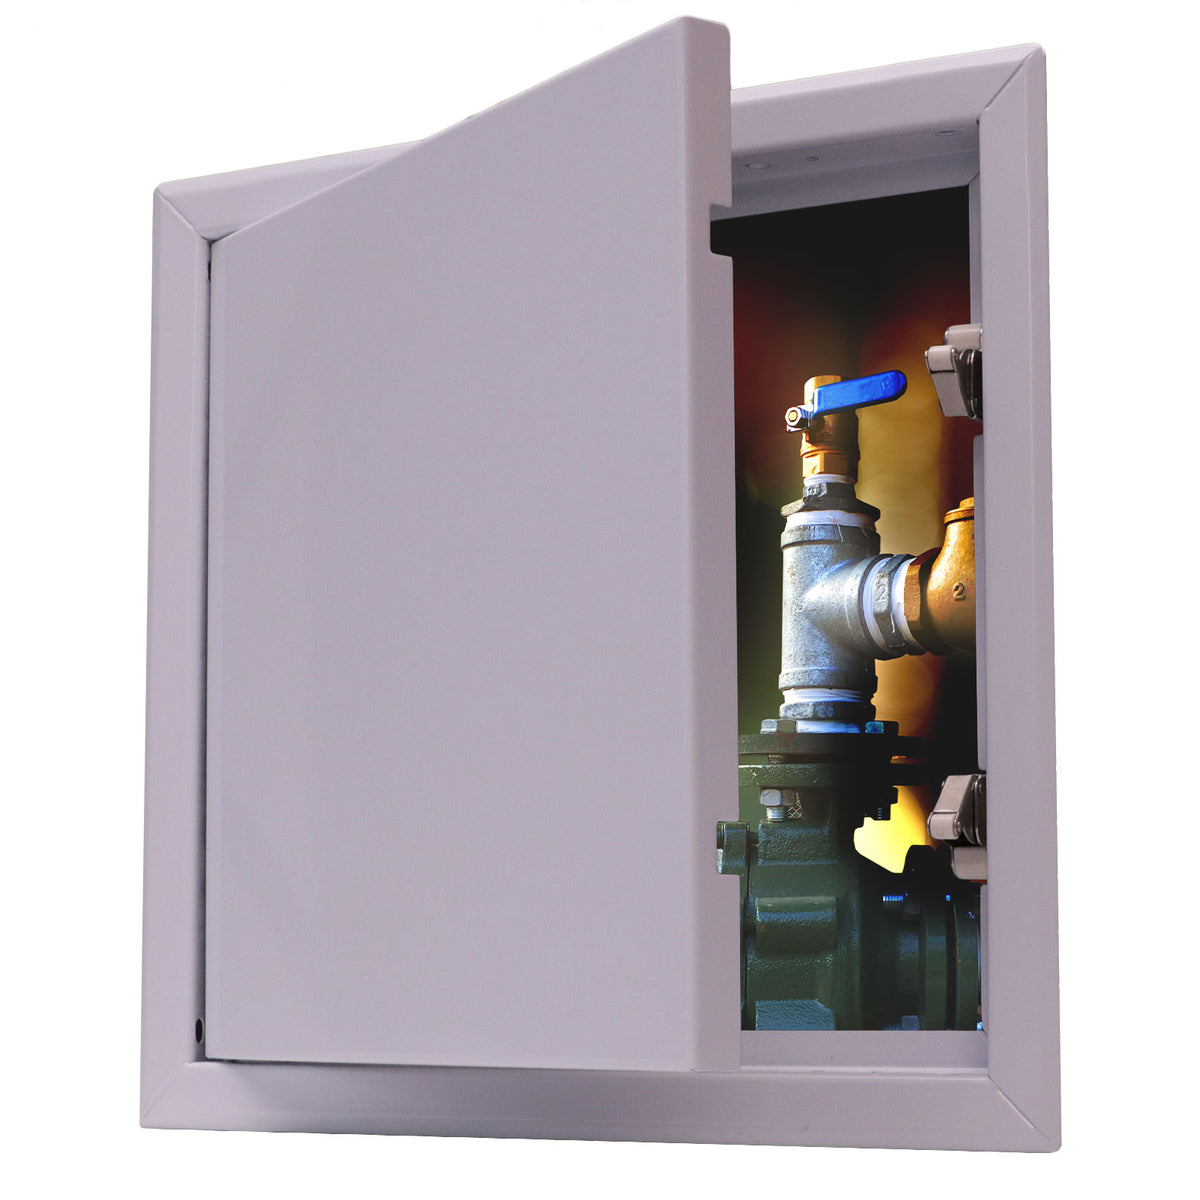 16&quot; X 16&quot; Universal Aluminum Access Panel Door For Wall / Ceiling Application (Push-Lock) With Solid Frame - [Outer Dimensions: 17&quot; Width X 17&quot; Height]